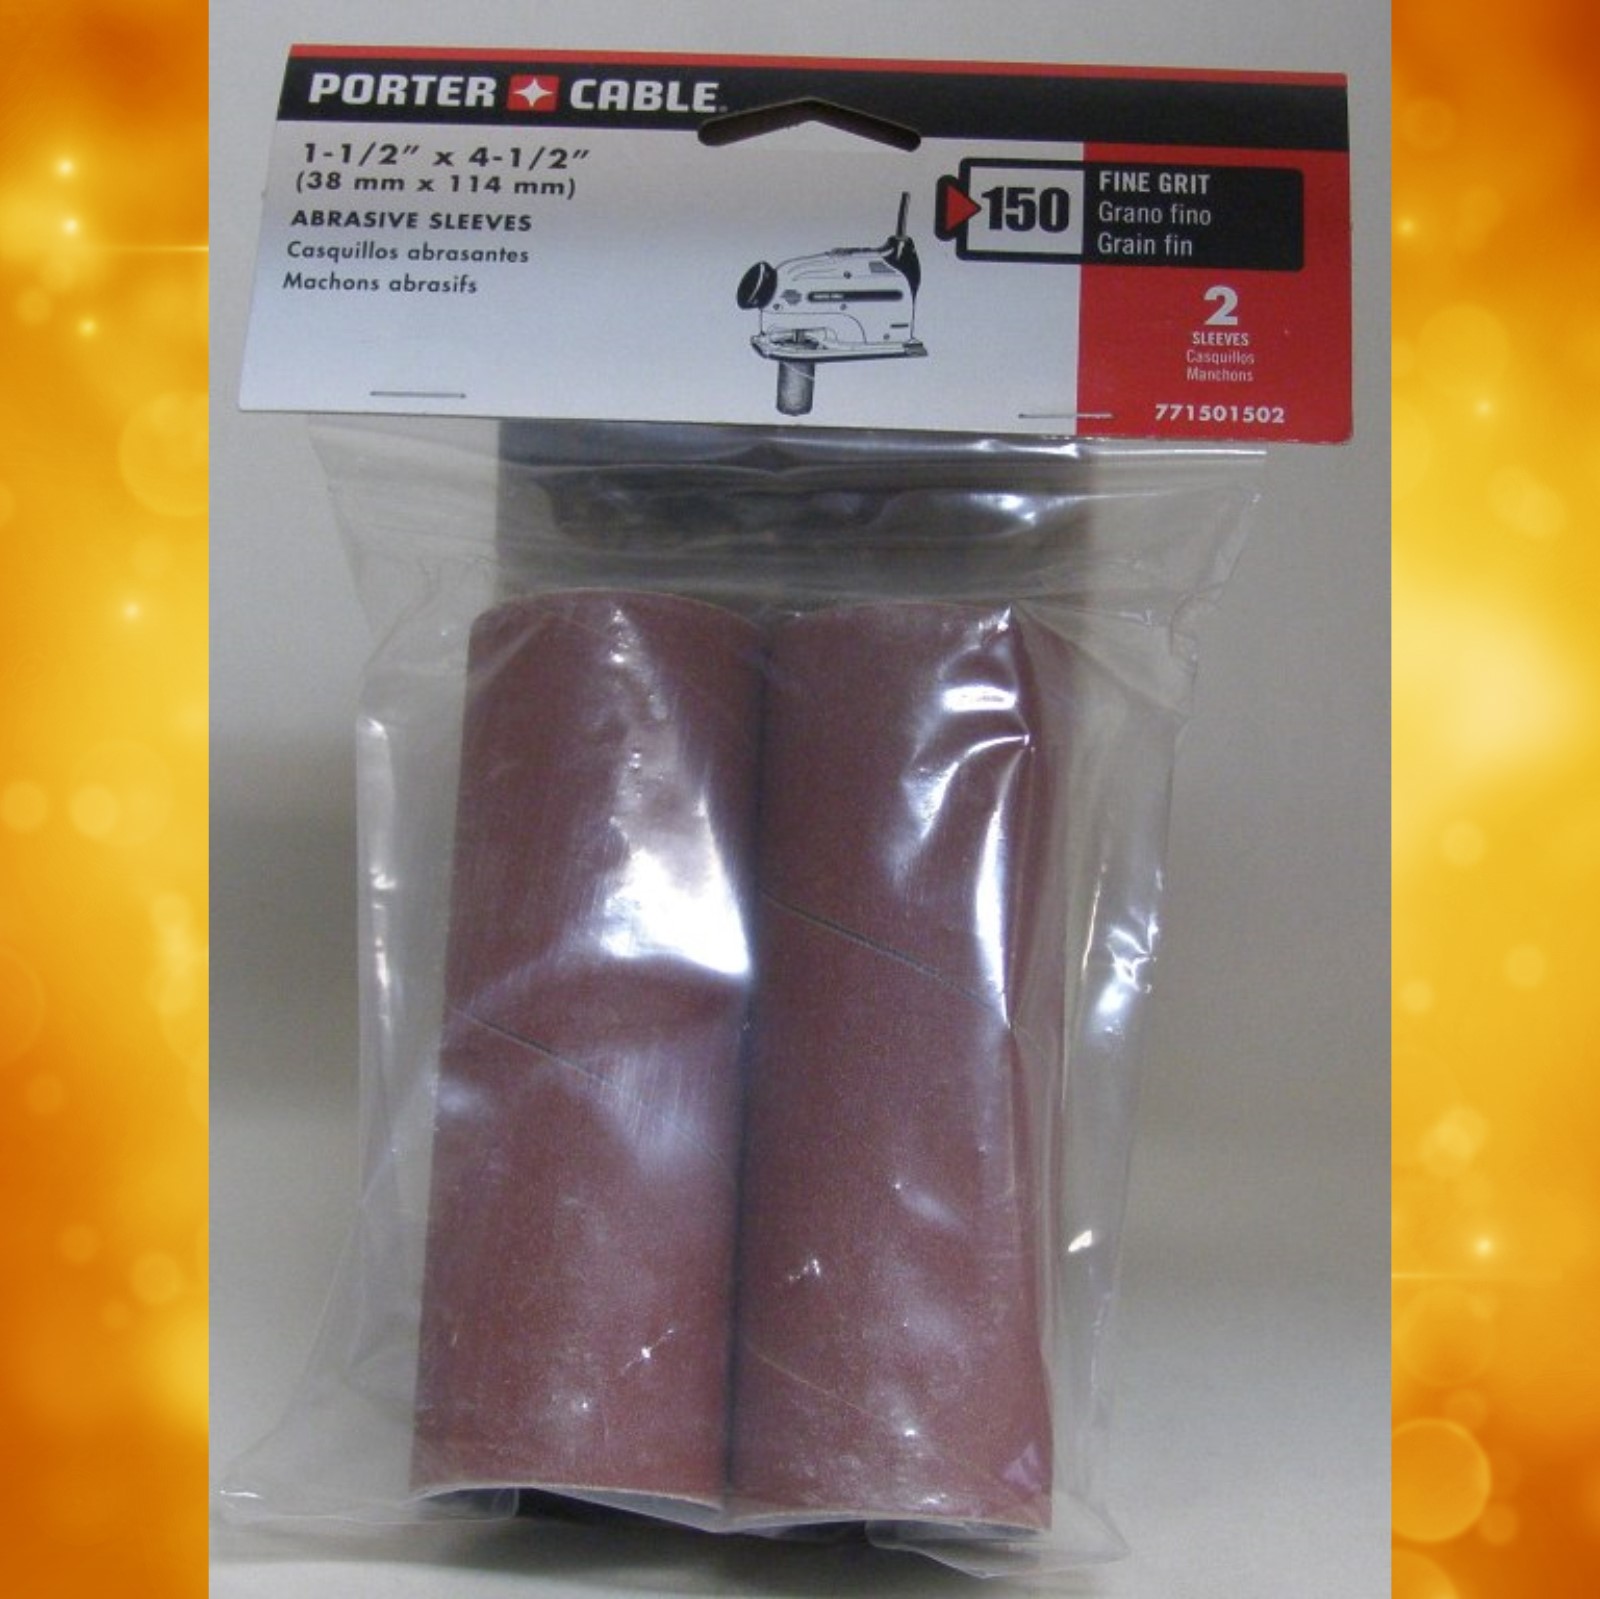 Porter-Cable 1-1/2" Drum Spindle Sanding Sleeve - 150 Grit 771501502